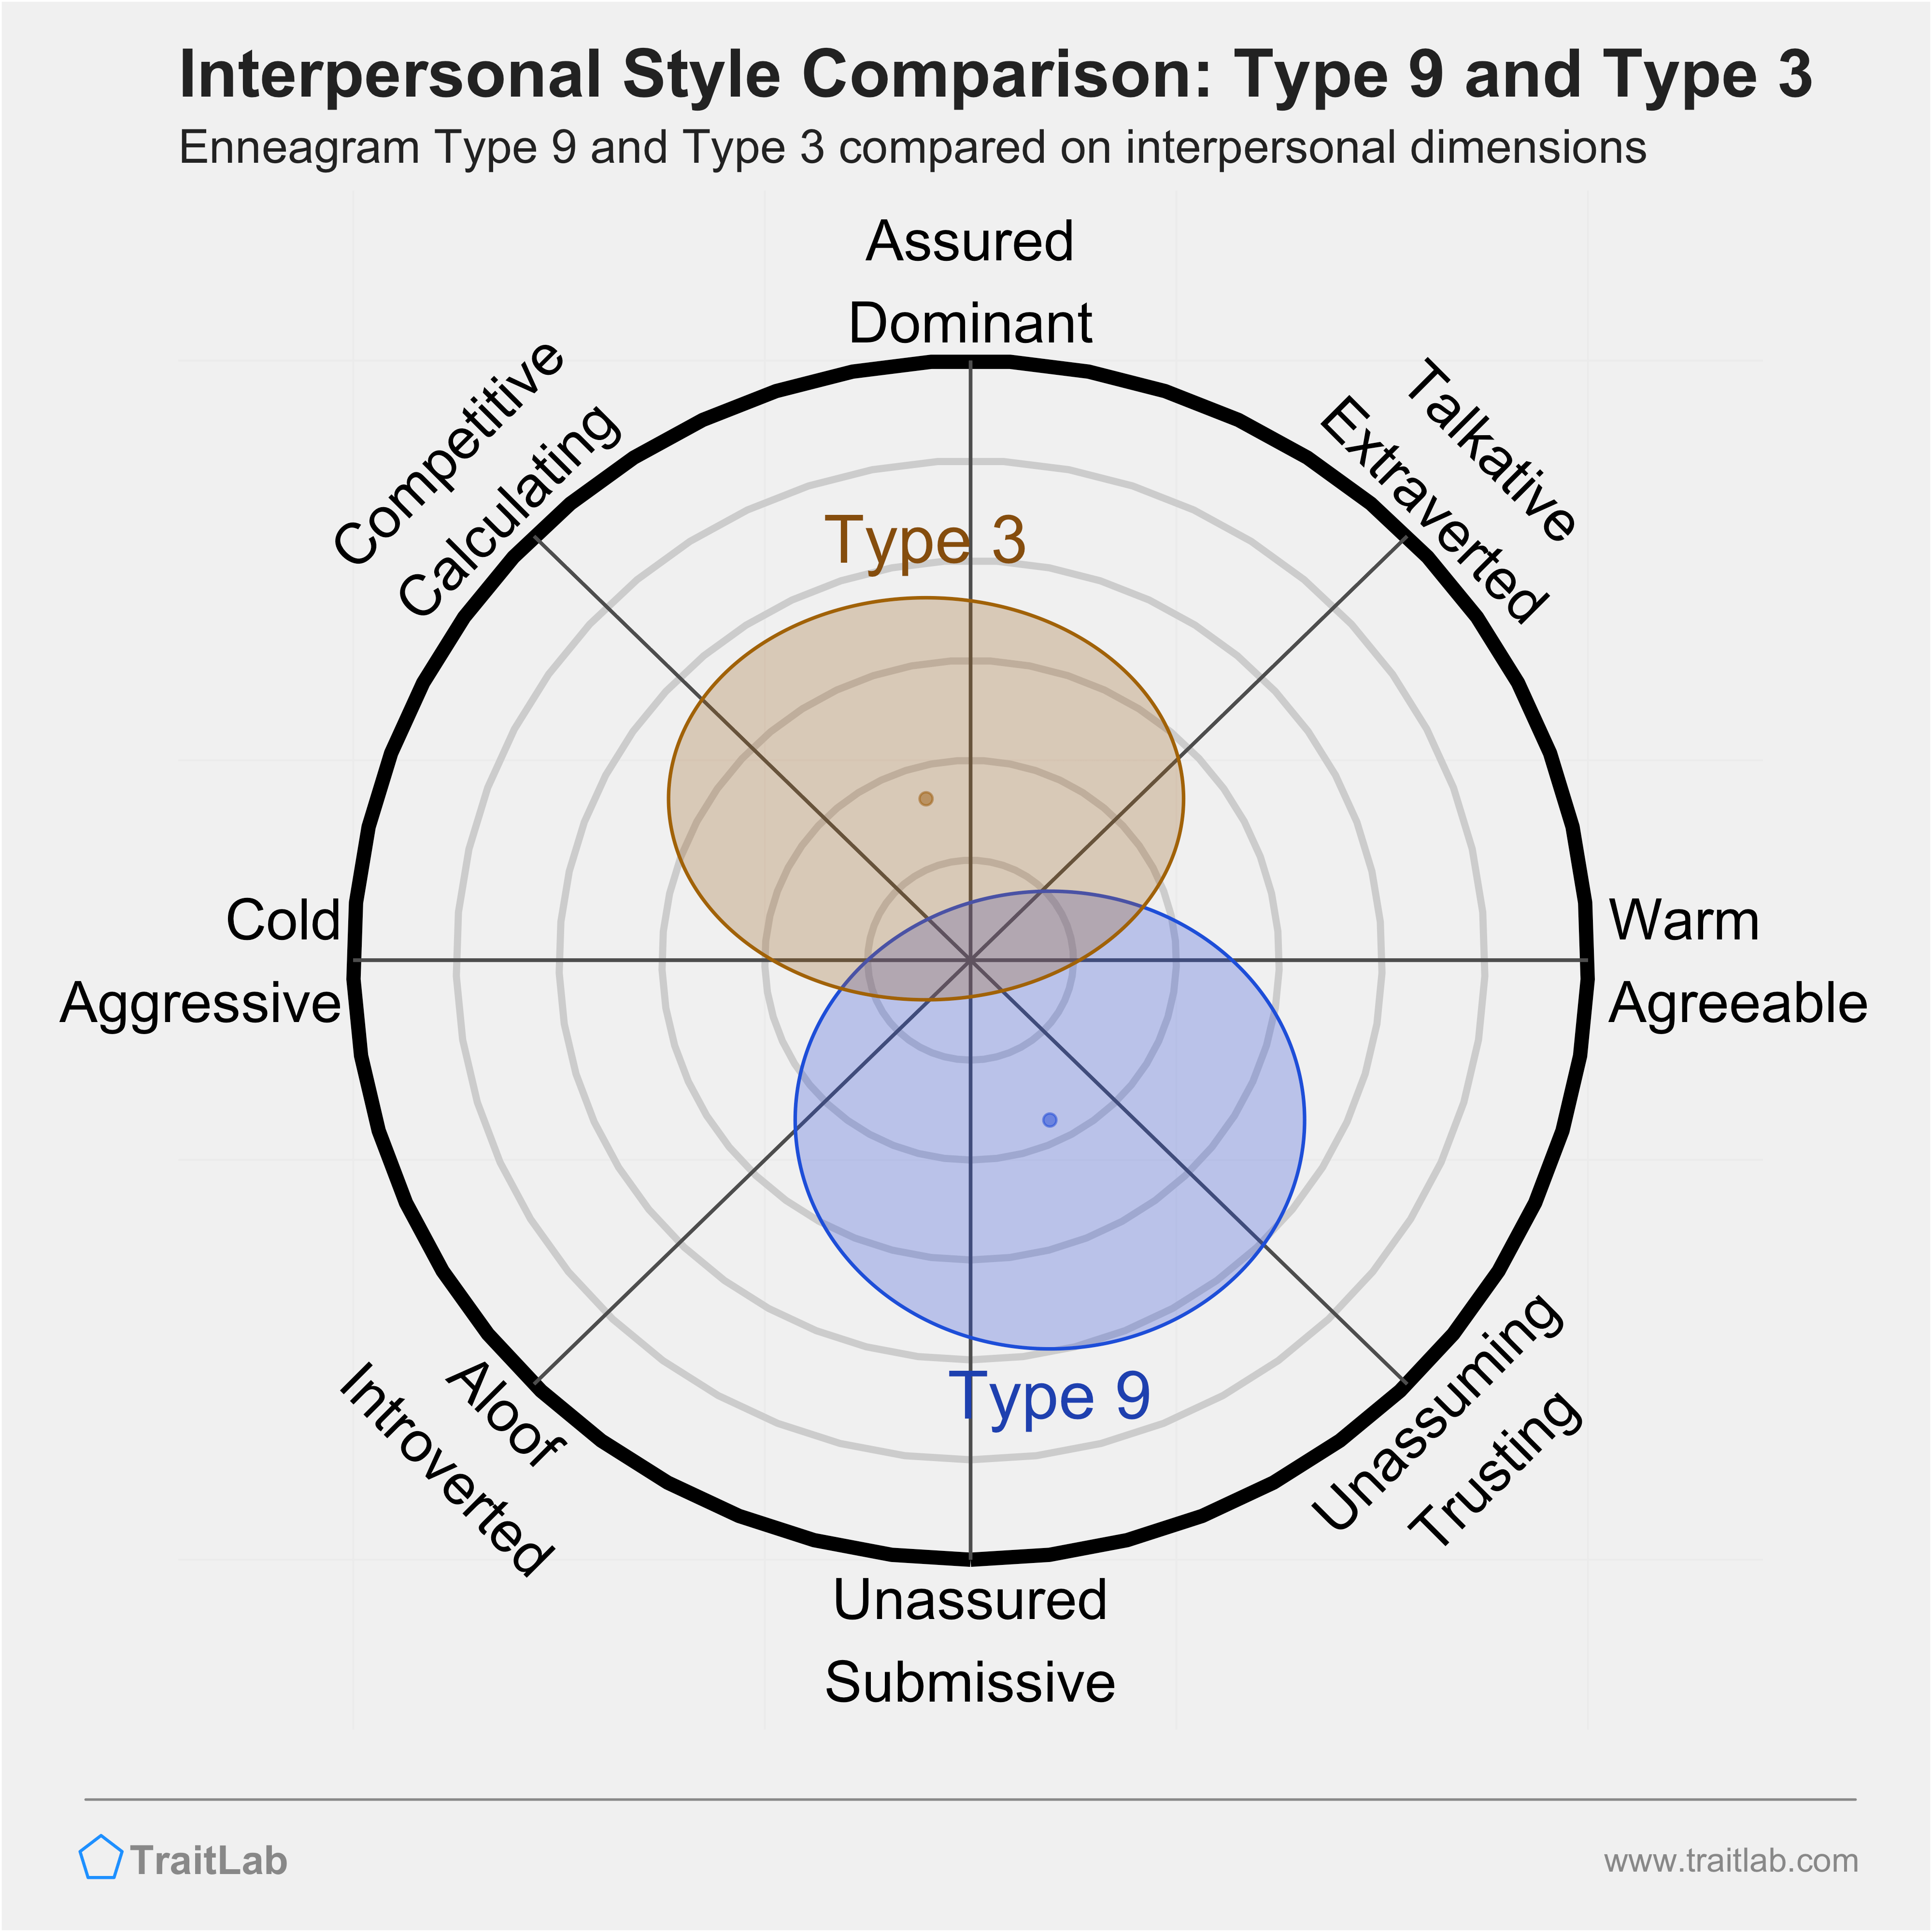 Enneagram Type 9 and Type 3 comparison across interpersonal dimensions